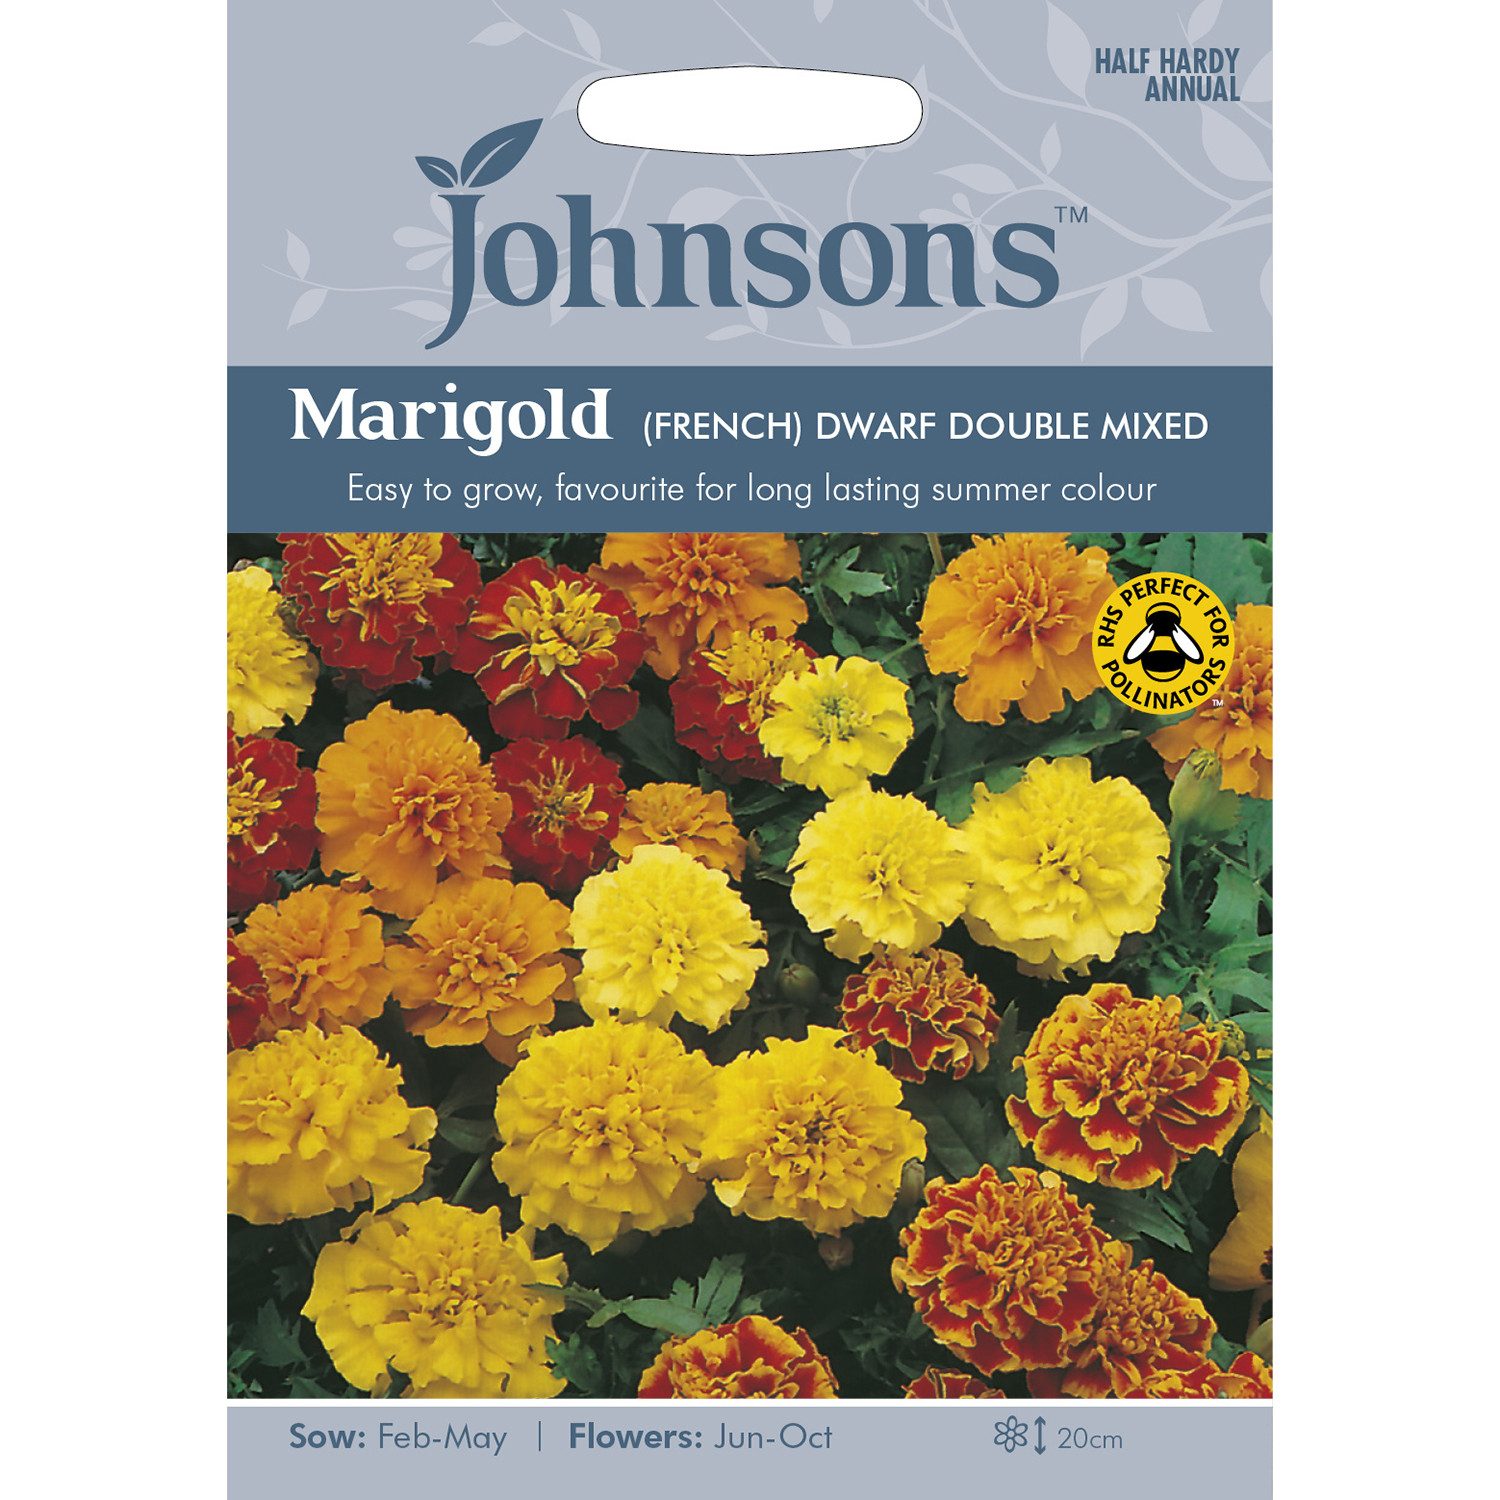 Johnsons Marigold French Dwarf Double Mixed Flower Seeds Image 2